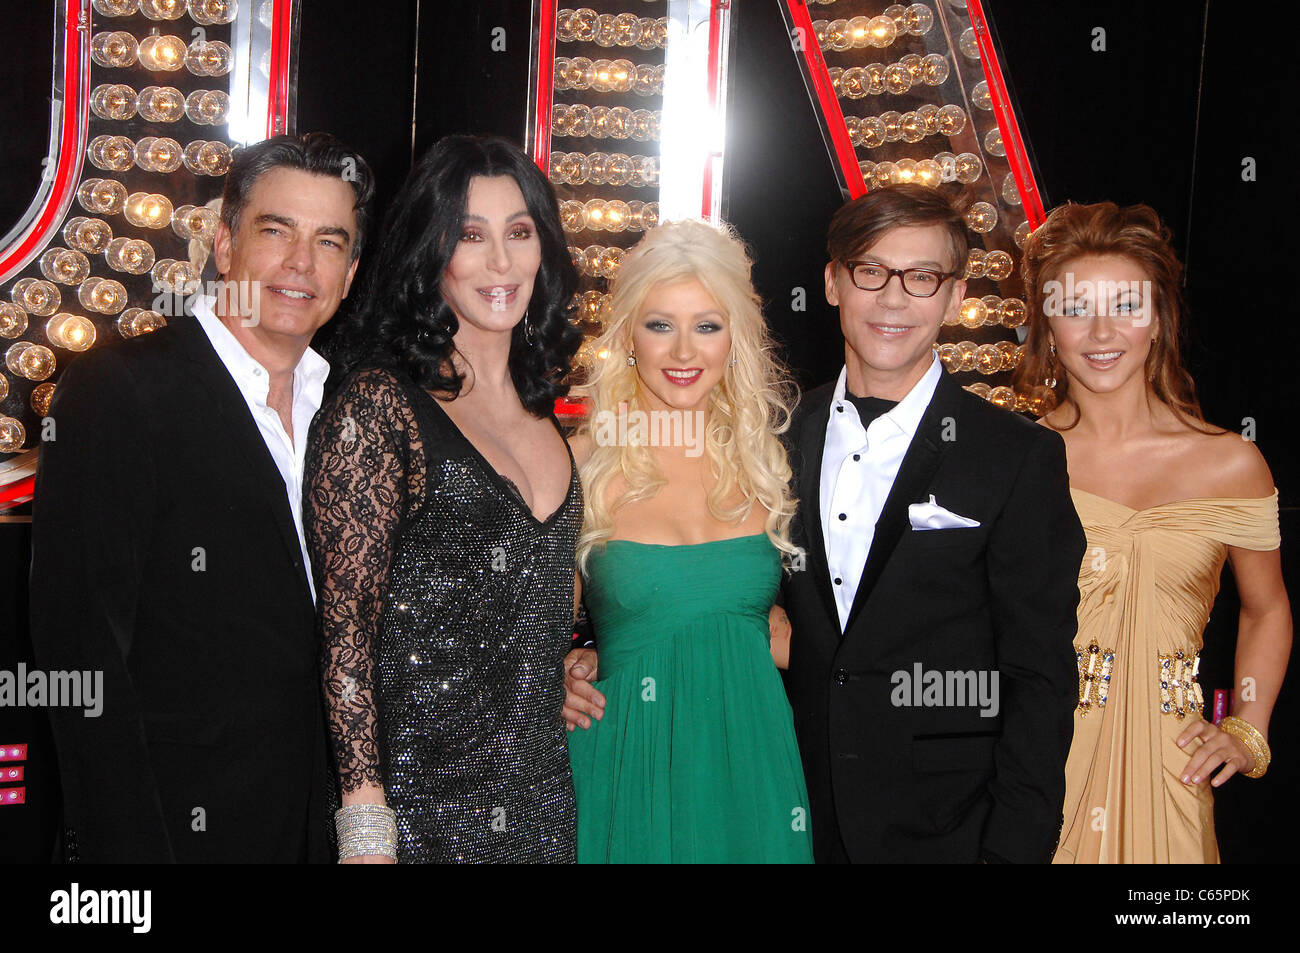 Peter Gallagher, Cher, Christina Aguilera, Steven Antin, Julianne Hough at arrivals for BURLESQUE Premiere, Grauman's Chinese Theatre, Los Angeles, CA November 15, 2010. Photo By: Michael Germana/Everett Collection Stock Photo